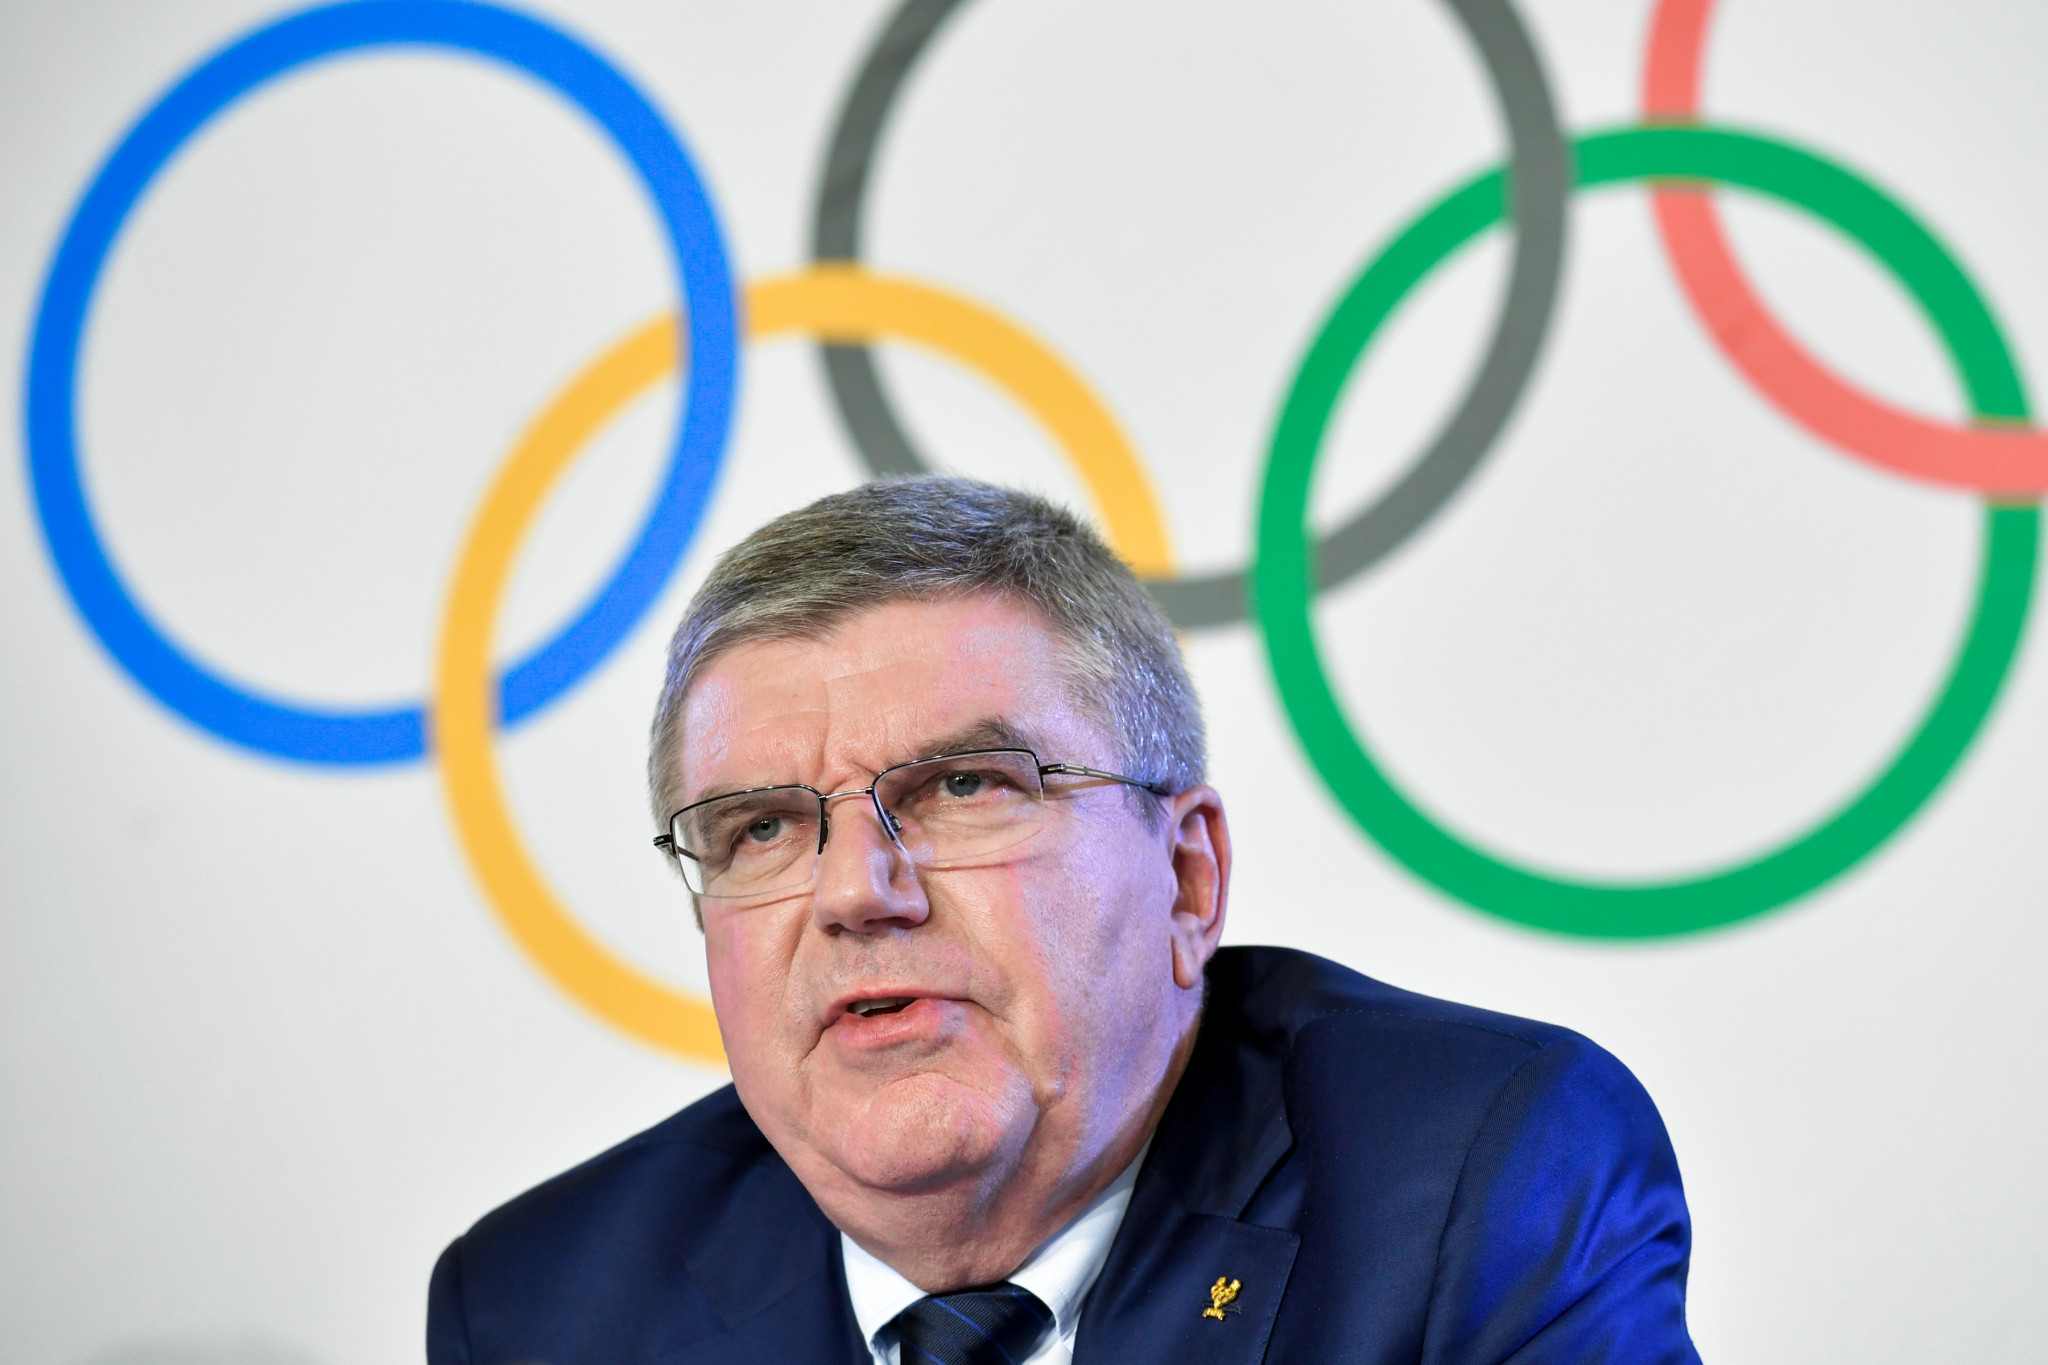 Buvaisar Saitiev believes the IOC, whose President is Thomas Bach, has damaged the Olympic Movement ©Getty Images